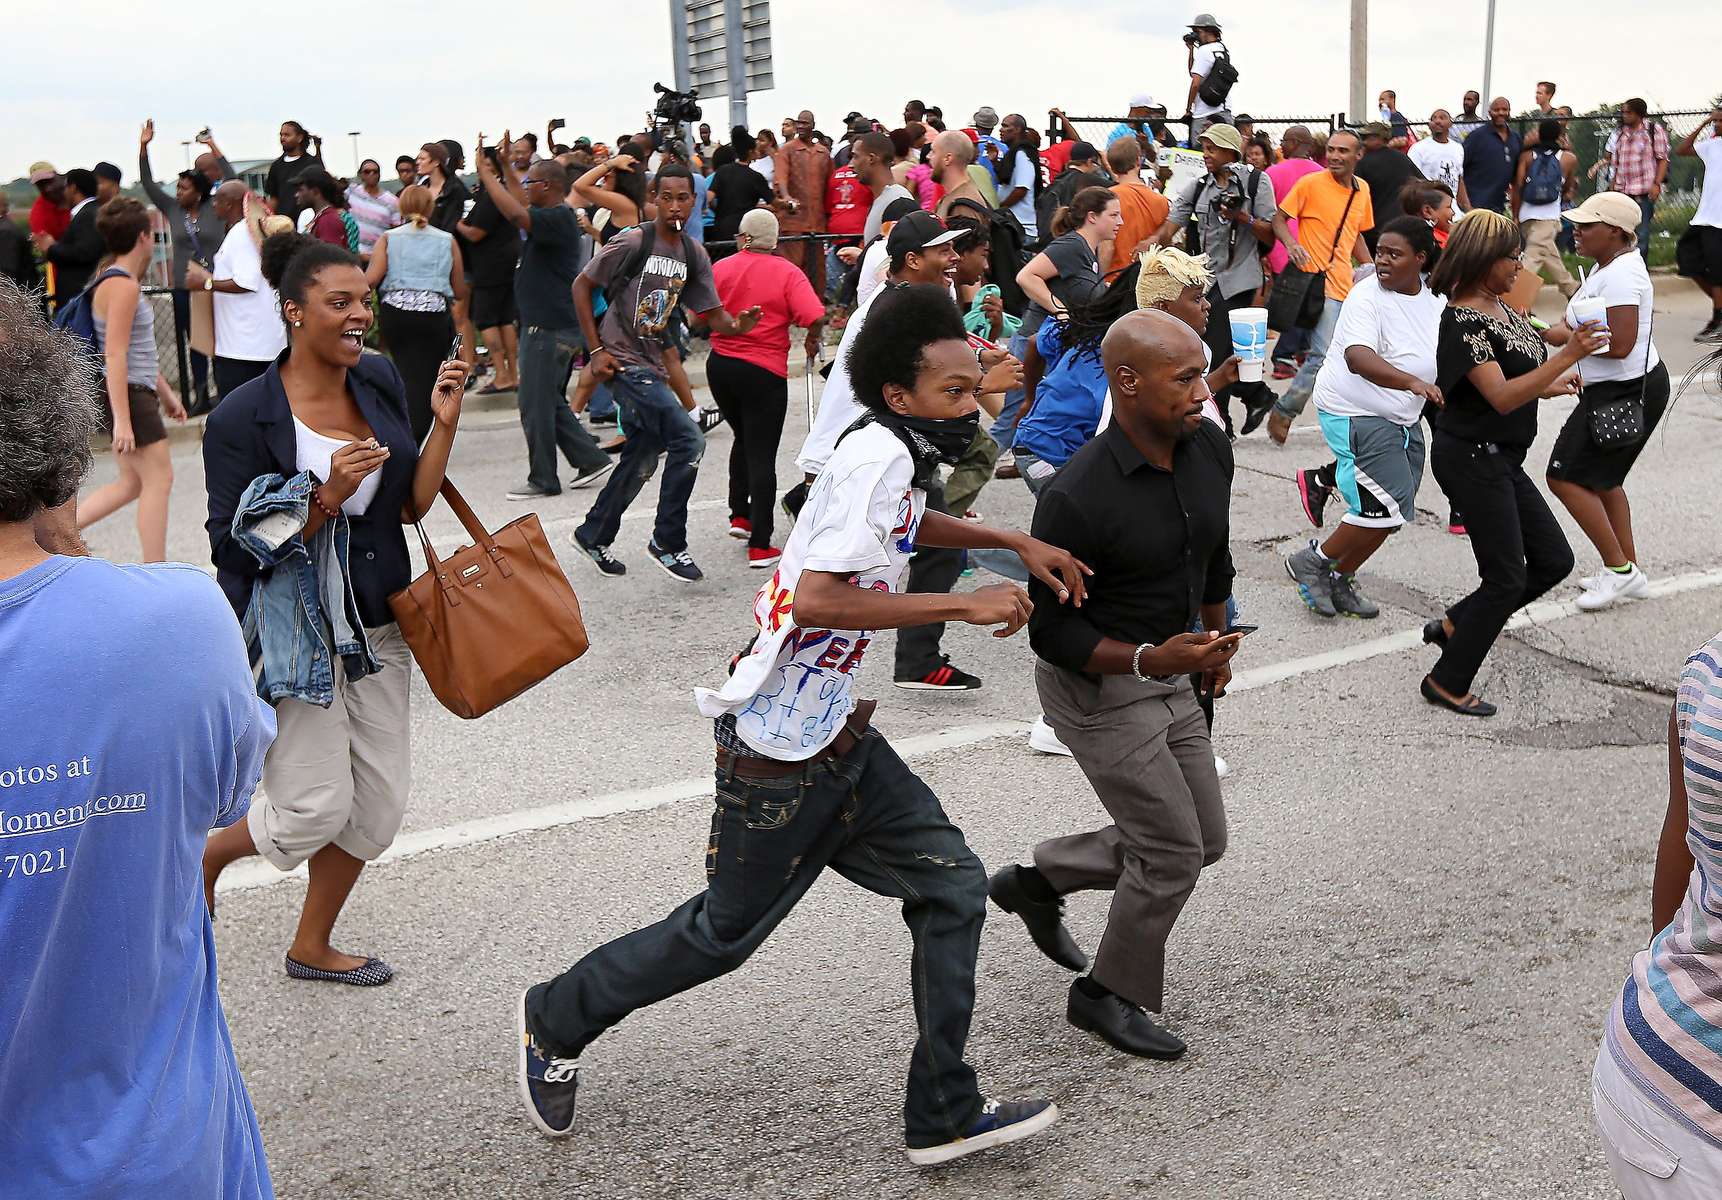 Members of the crowd scatter as police rush into a sea of people in an attempt to make an arrest during a demonstration on Hanley Road at Interstate 70 in St. Louis County on Wednesday, Sept. 10, 2014.  Protesters had announced their intention to shutdown traffic on Interstate 70 to protest the fatal shooting of Michael Brown by a Ferguson police officer but police block protesters access to the highway.